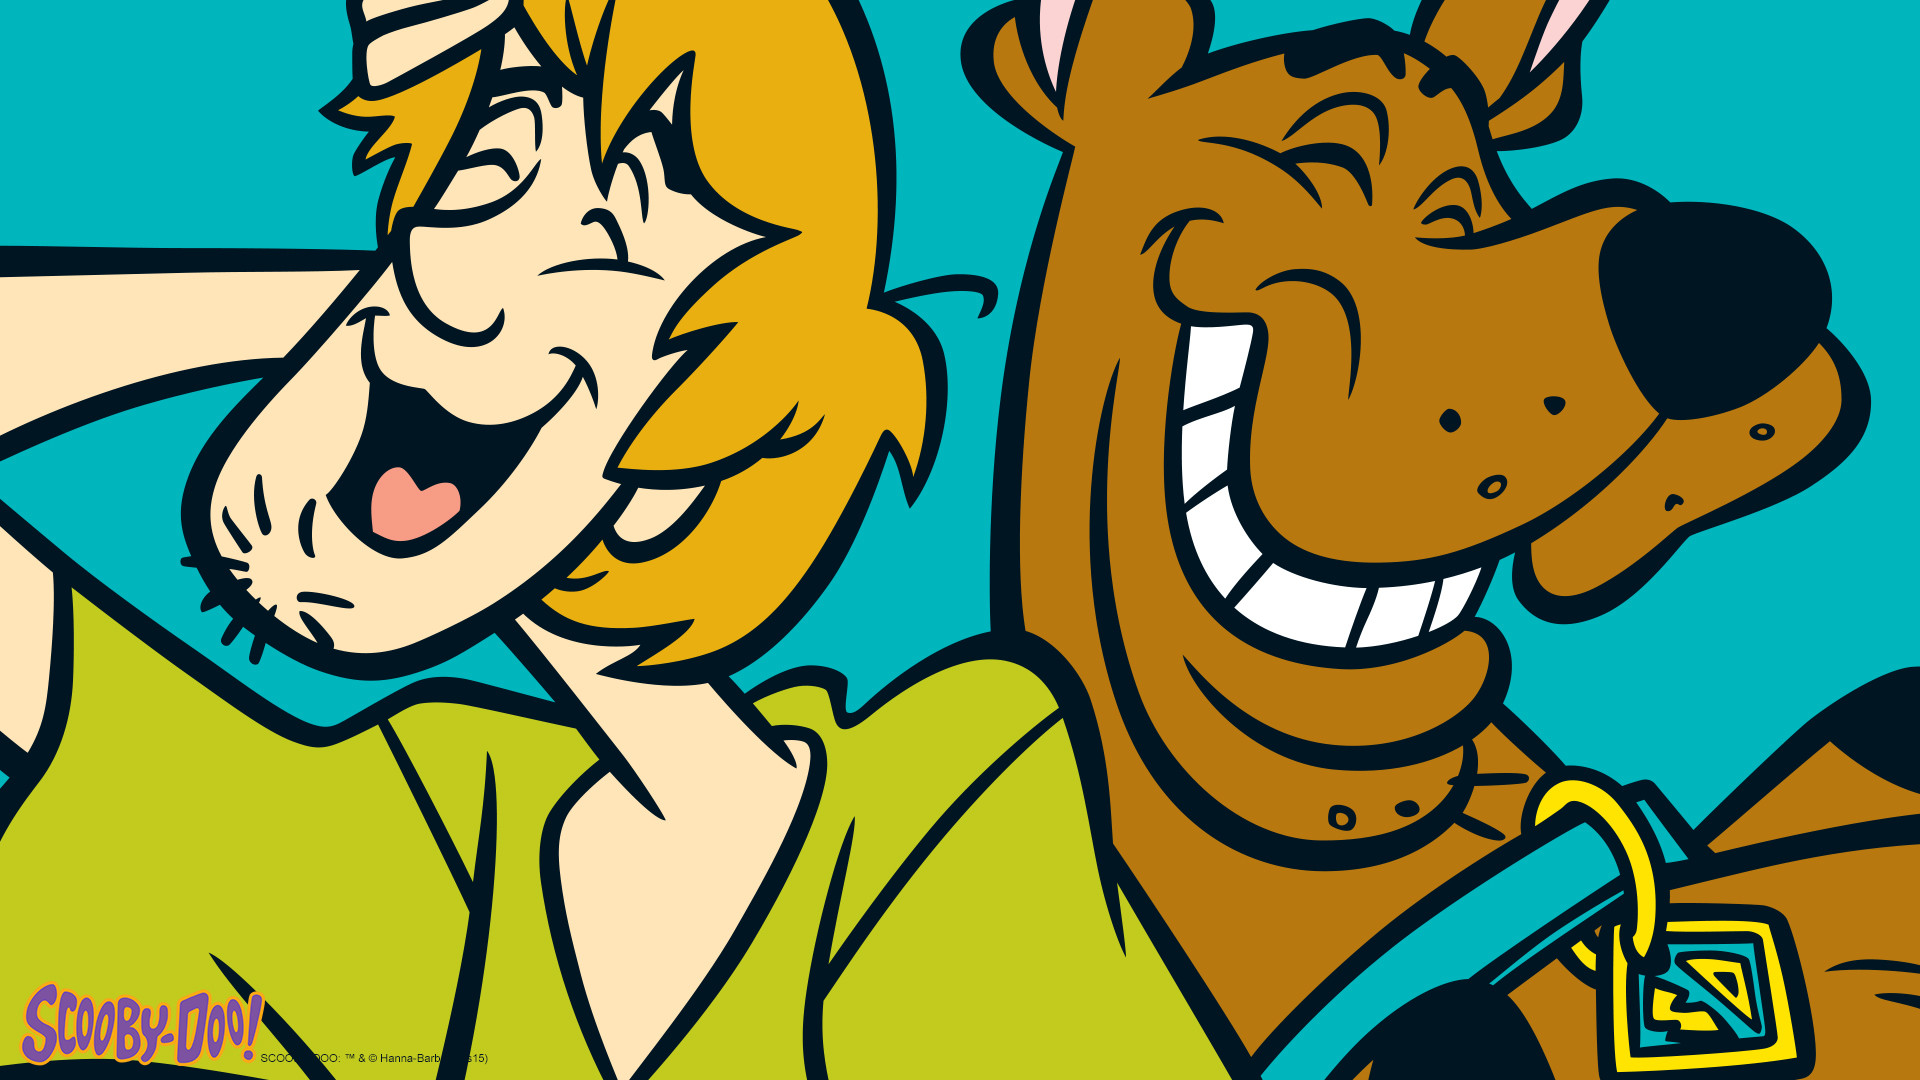 1920x1080 Scooby-Doo images Scooby And Shaggy HD wallpaper and background photos